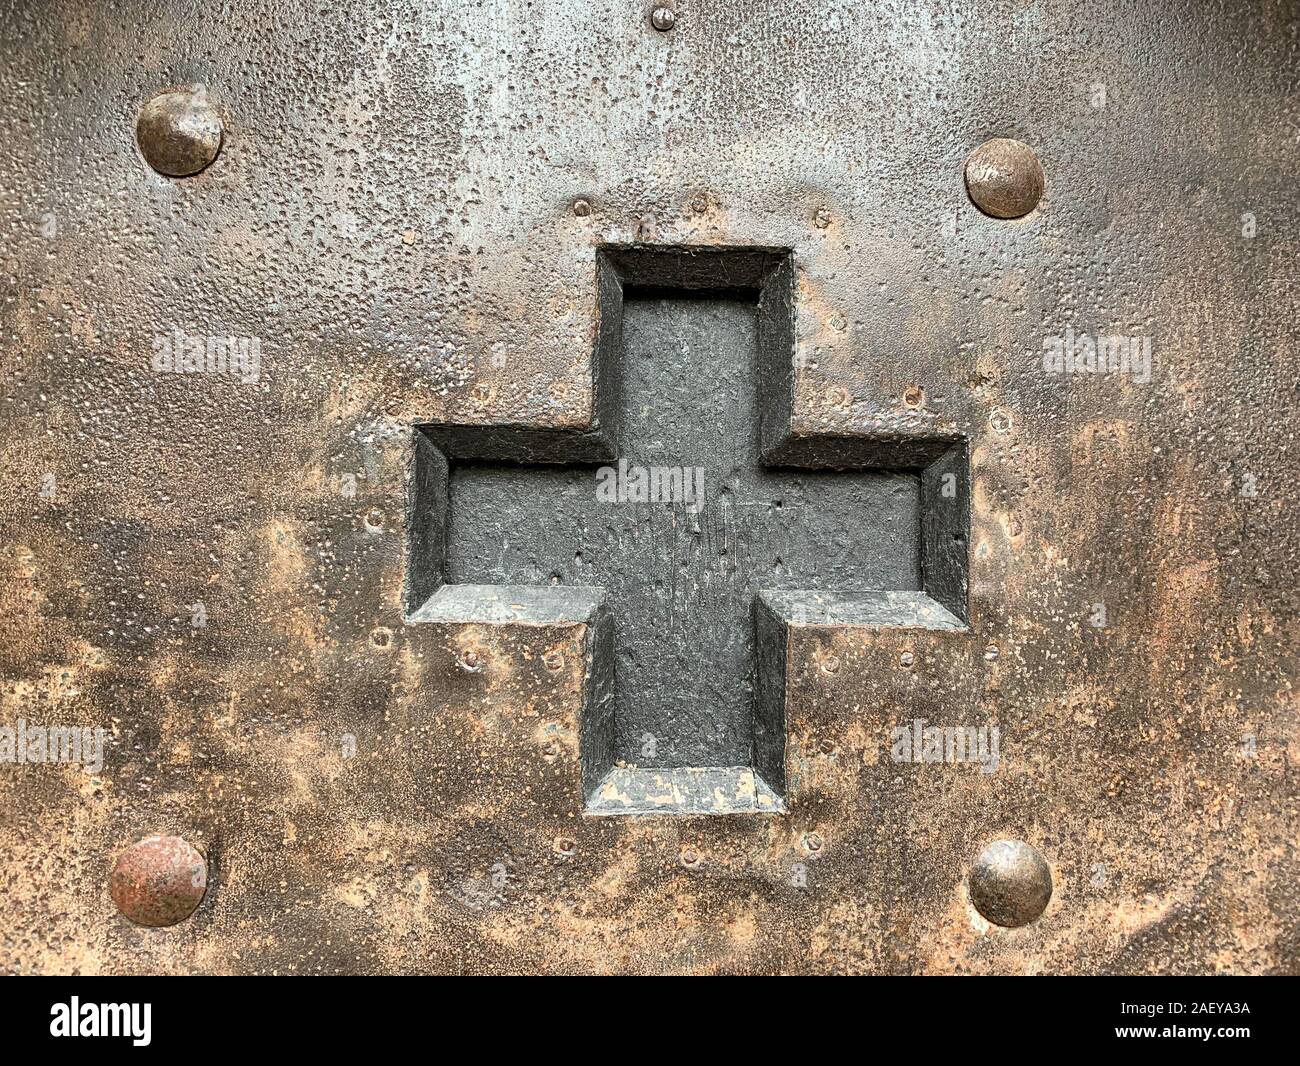 Cutted out black cross in an iron door with rivets, nails and screws. Old metal fitting from the Middle Ages, weathered, oxidized and preserved. Stock Photo